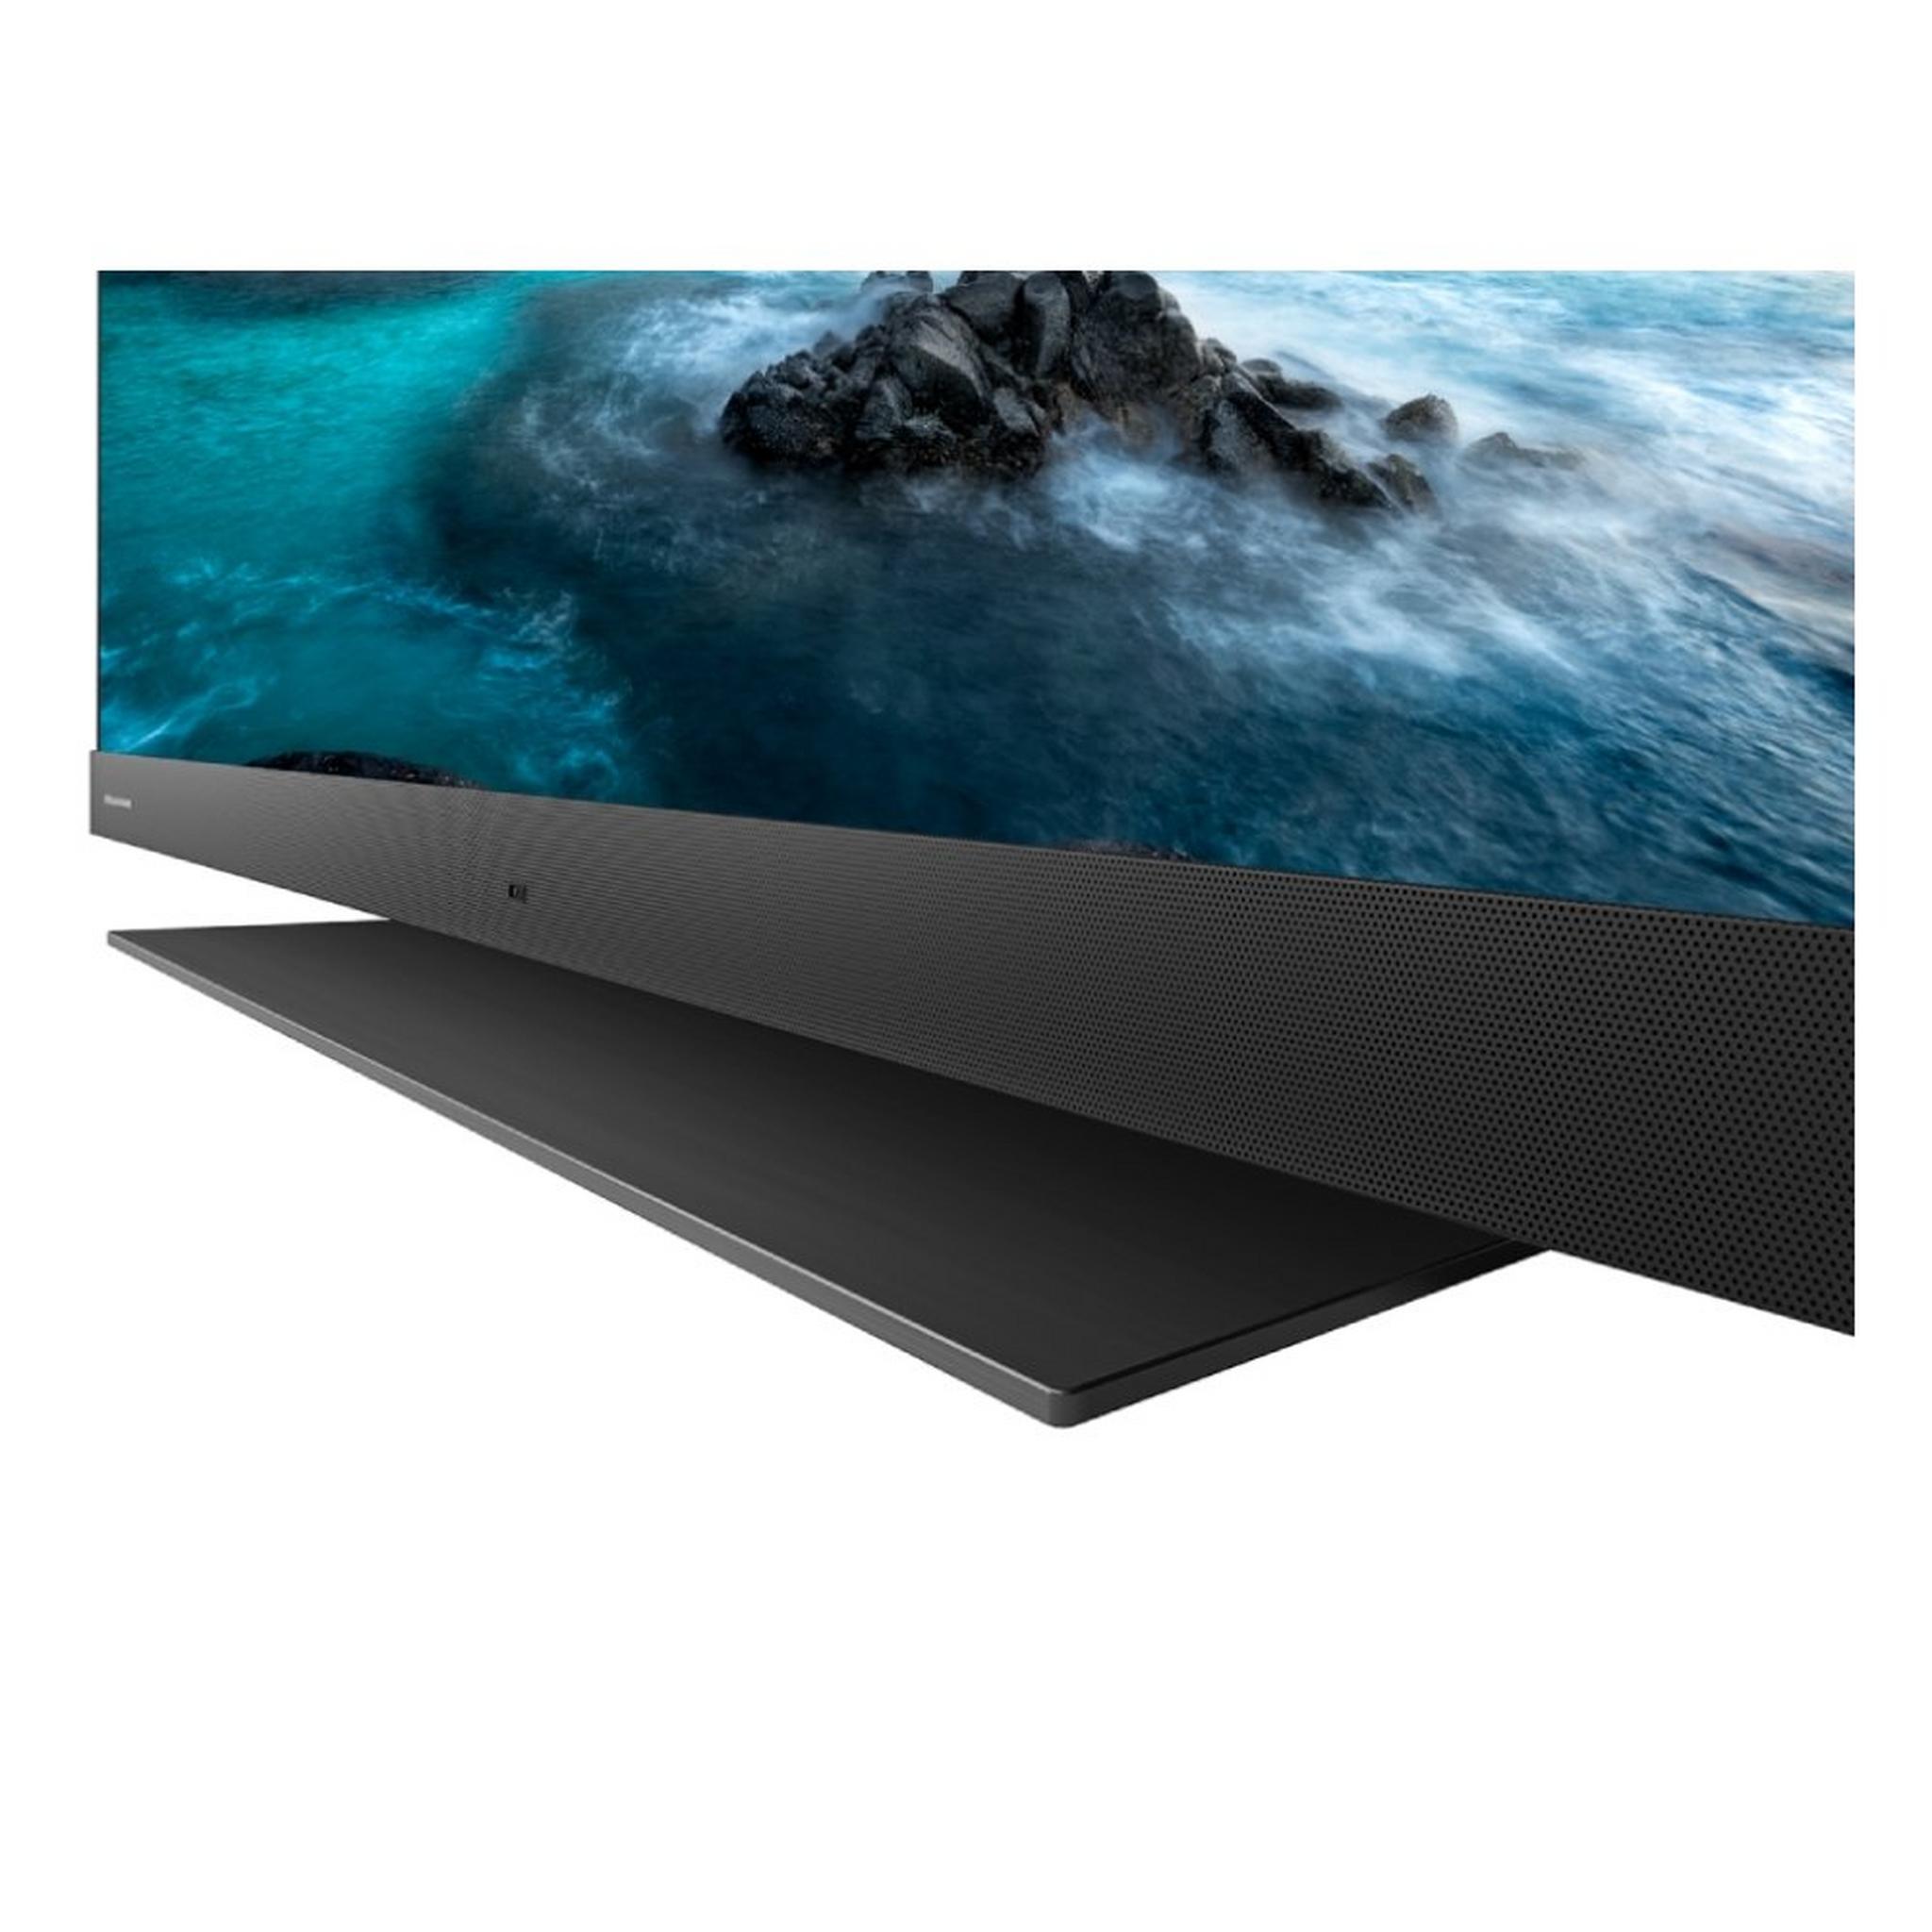 Toshiba 65-inch Android UHD QLED TV (65Z770)